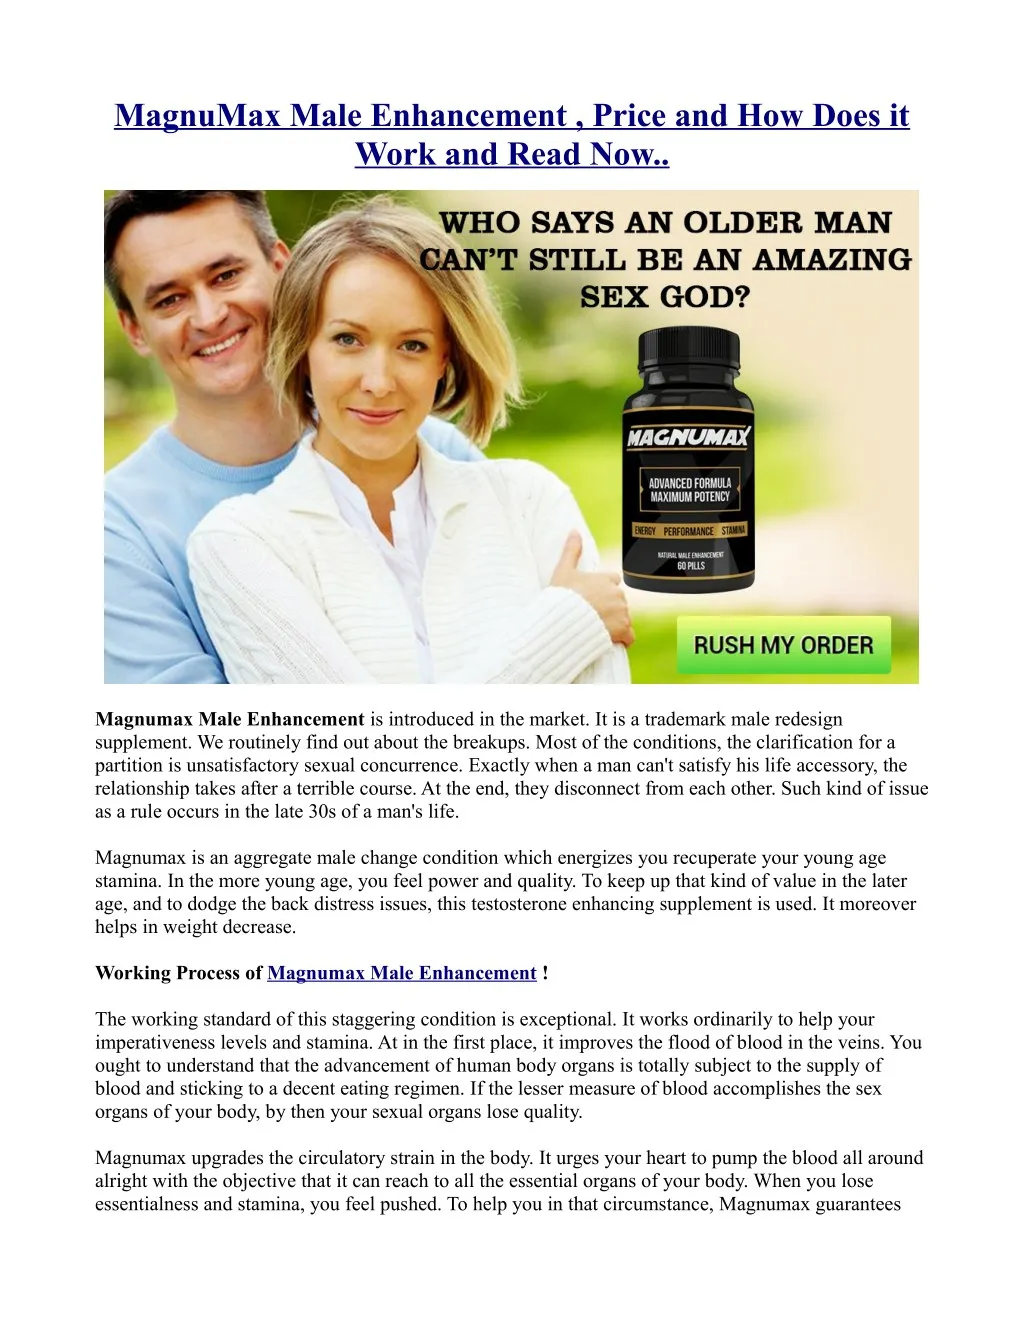 magnumax male enhancement price and how does